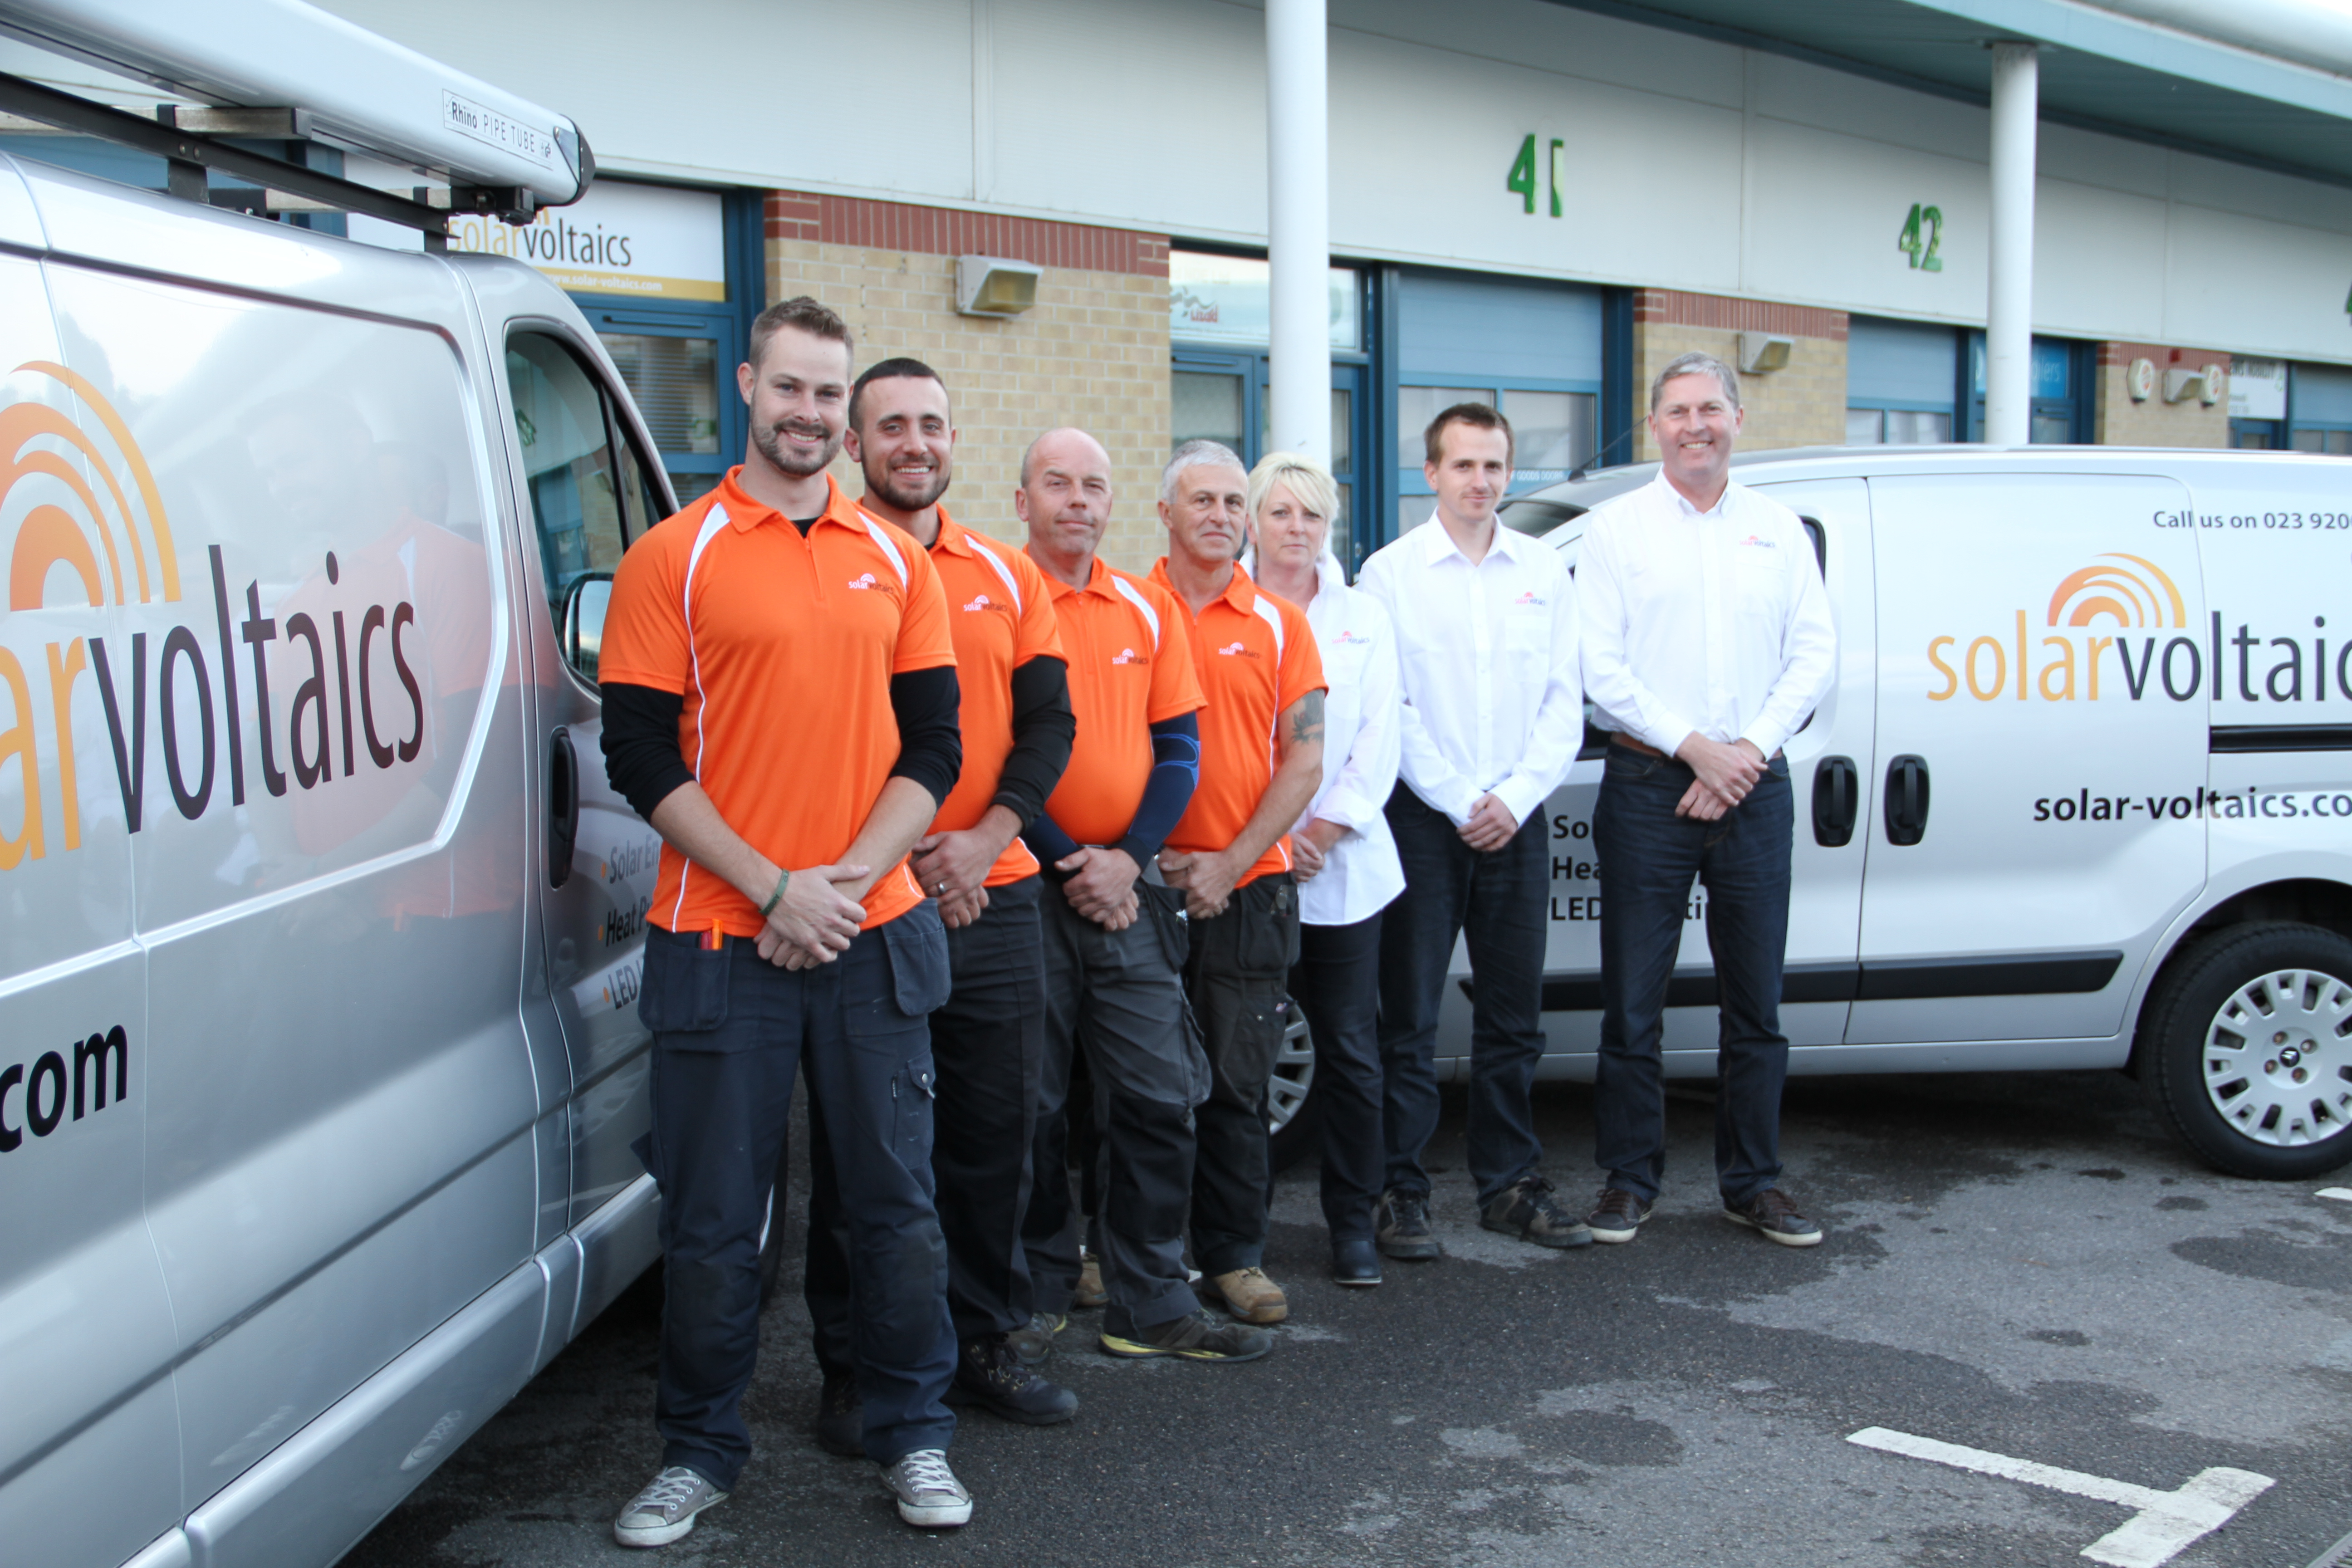 Solar Voltaics team photo - management and installation engineers in orange logo shirts - next to two of our vans